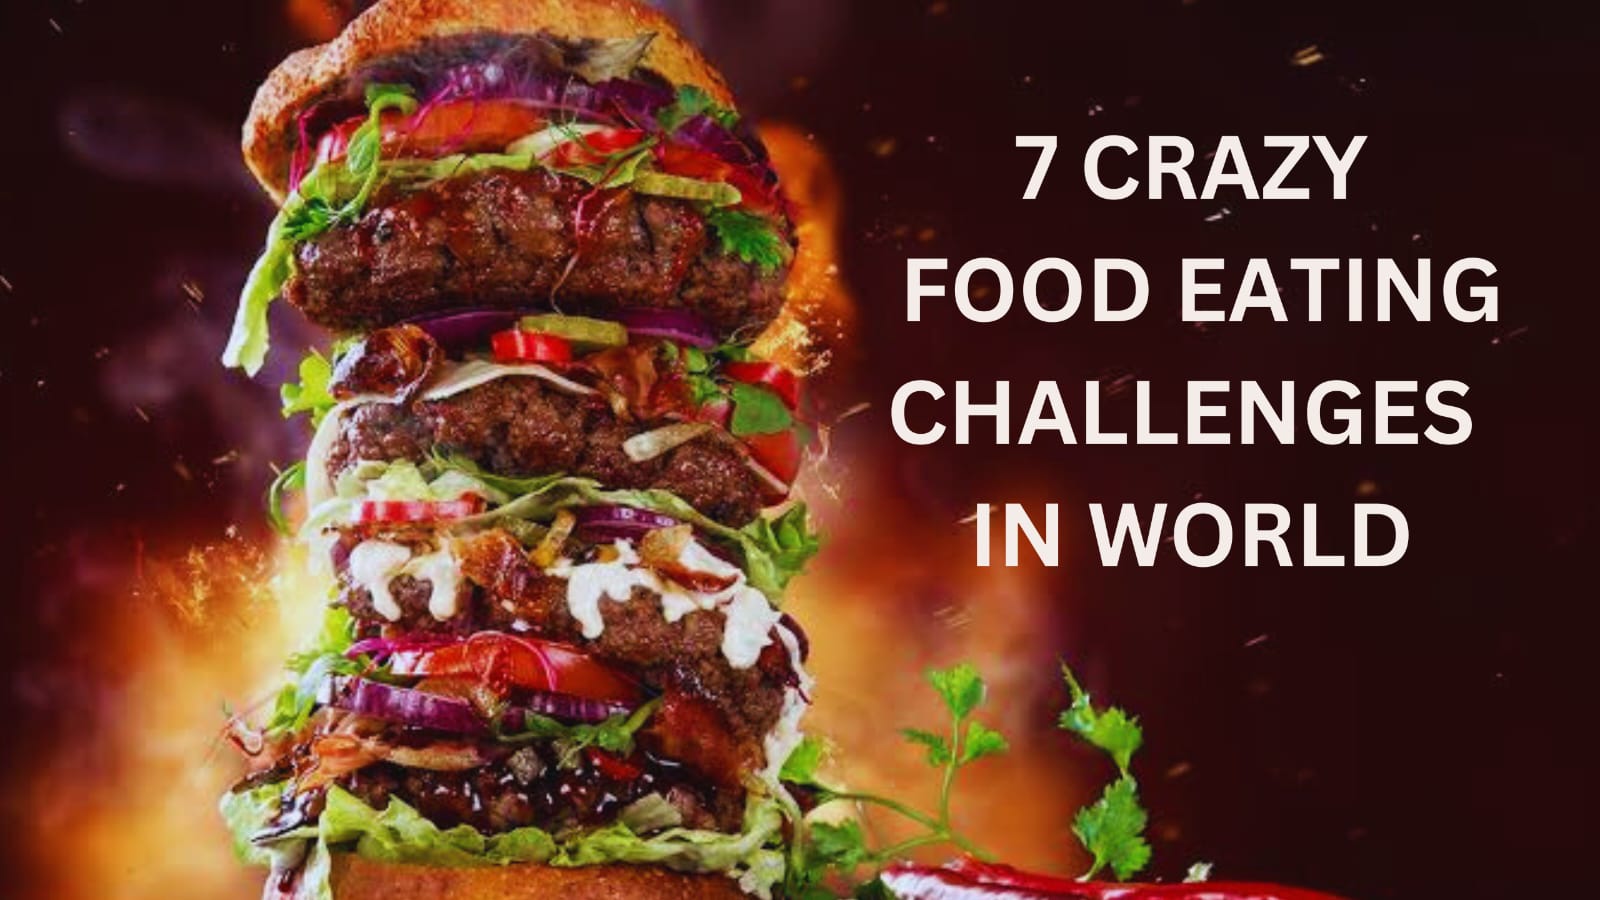 7 CRAZY FOOD EATING CHALLENGES IN WORLD